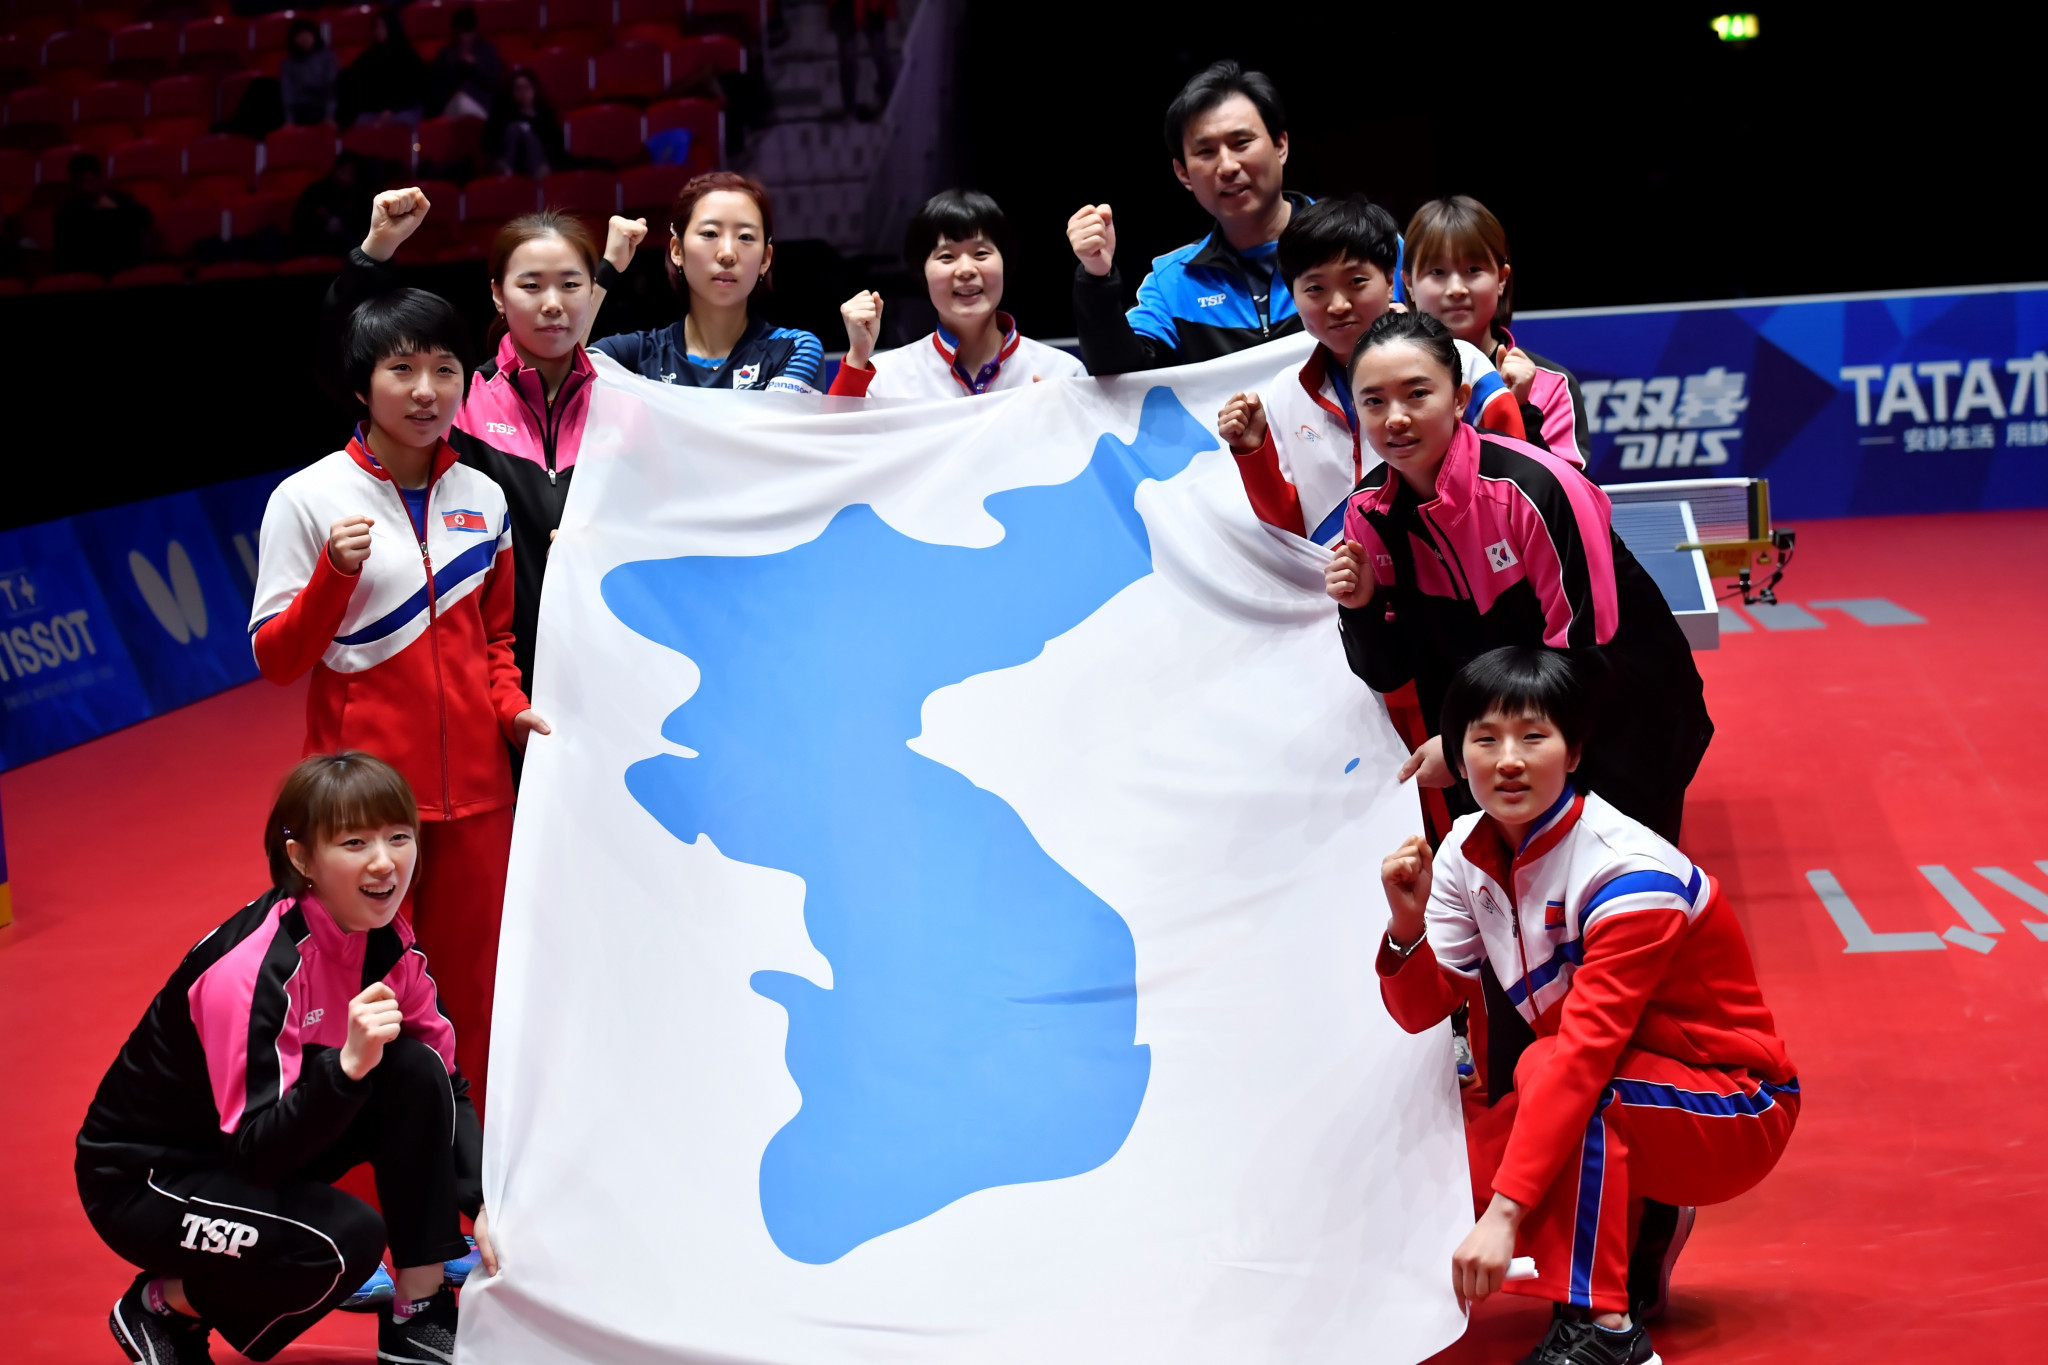 North and South Korea formed a unified team at the World Team Table Tennis Championships last week ©Getty Images